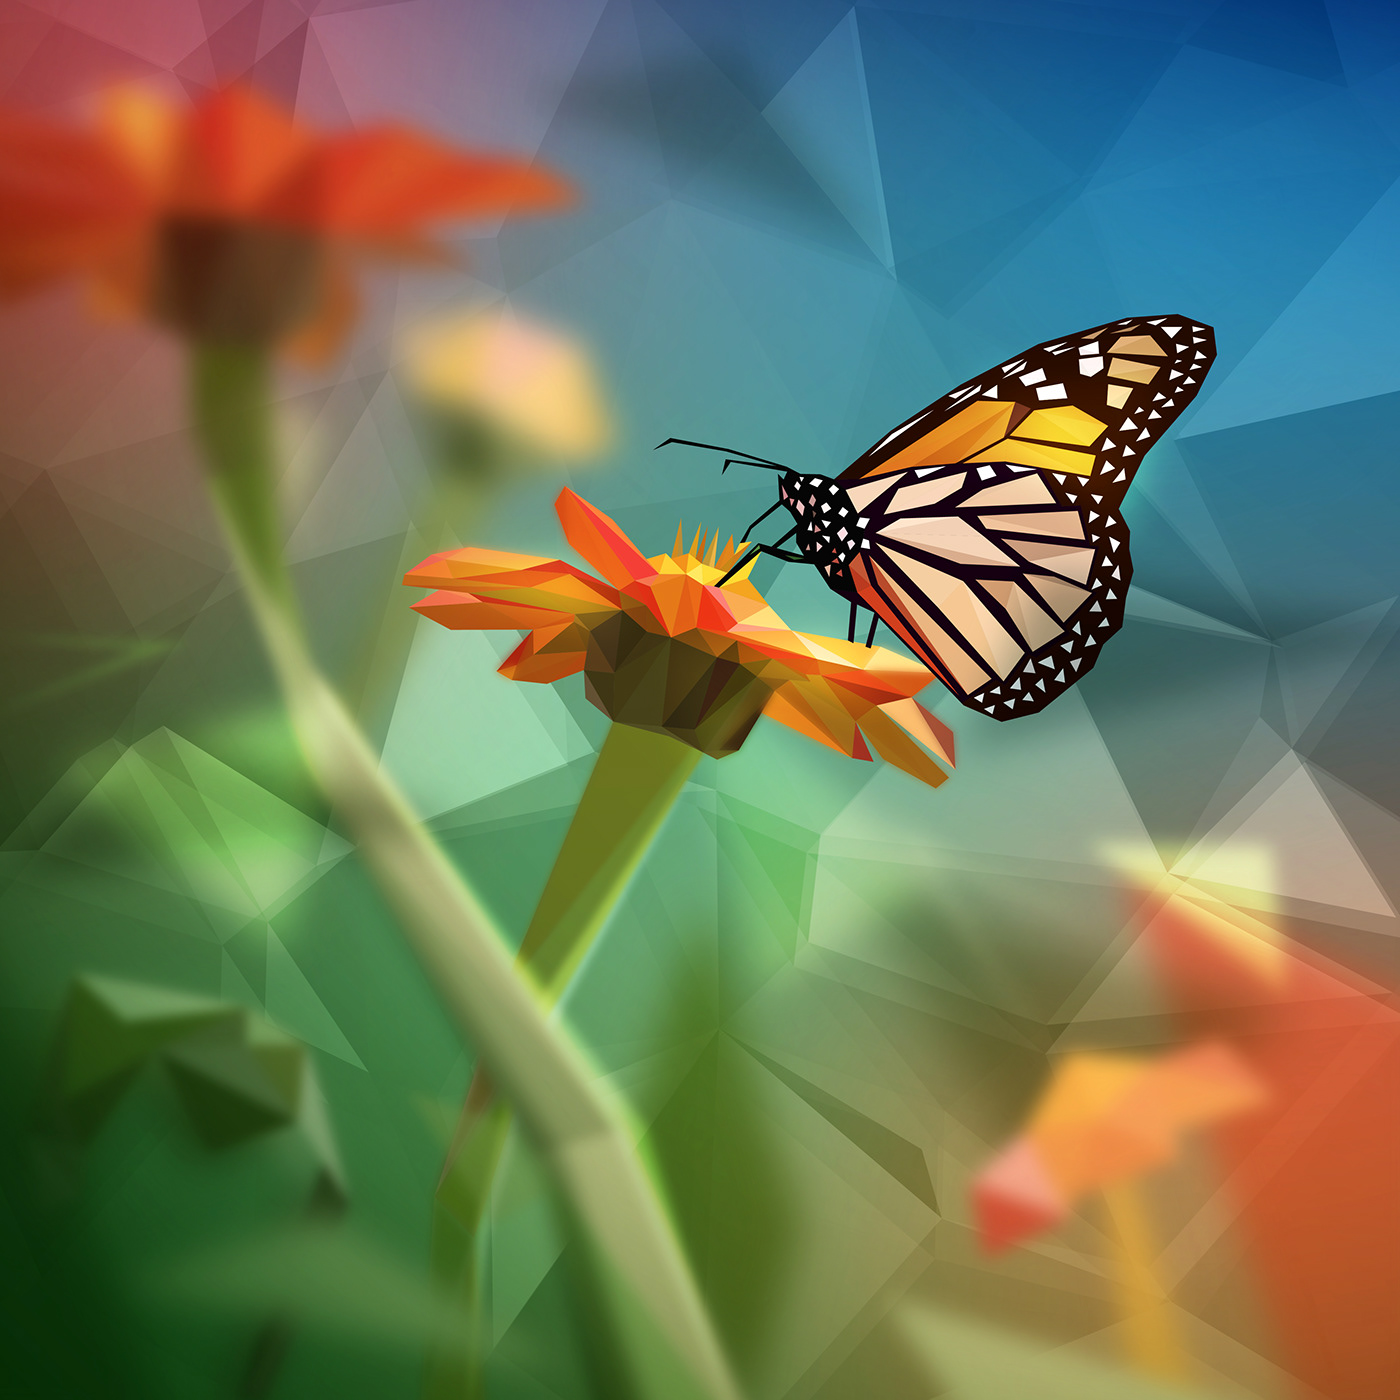 Low Poly illustration of a Monarch Butterfly!